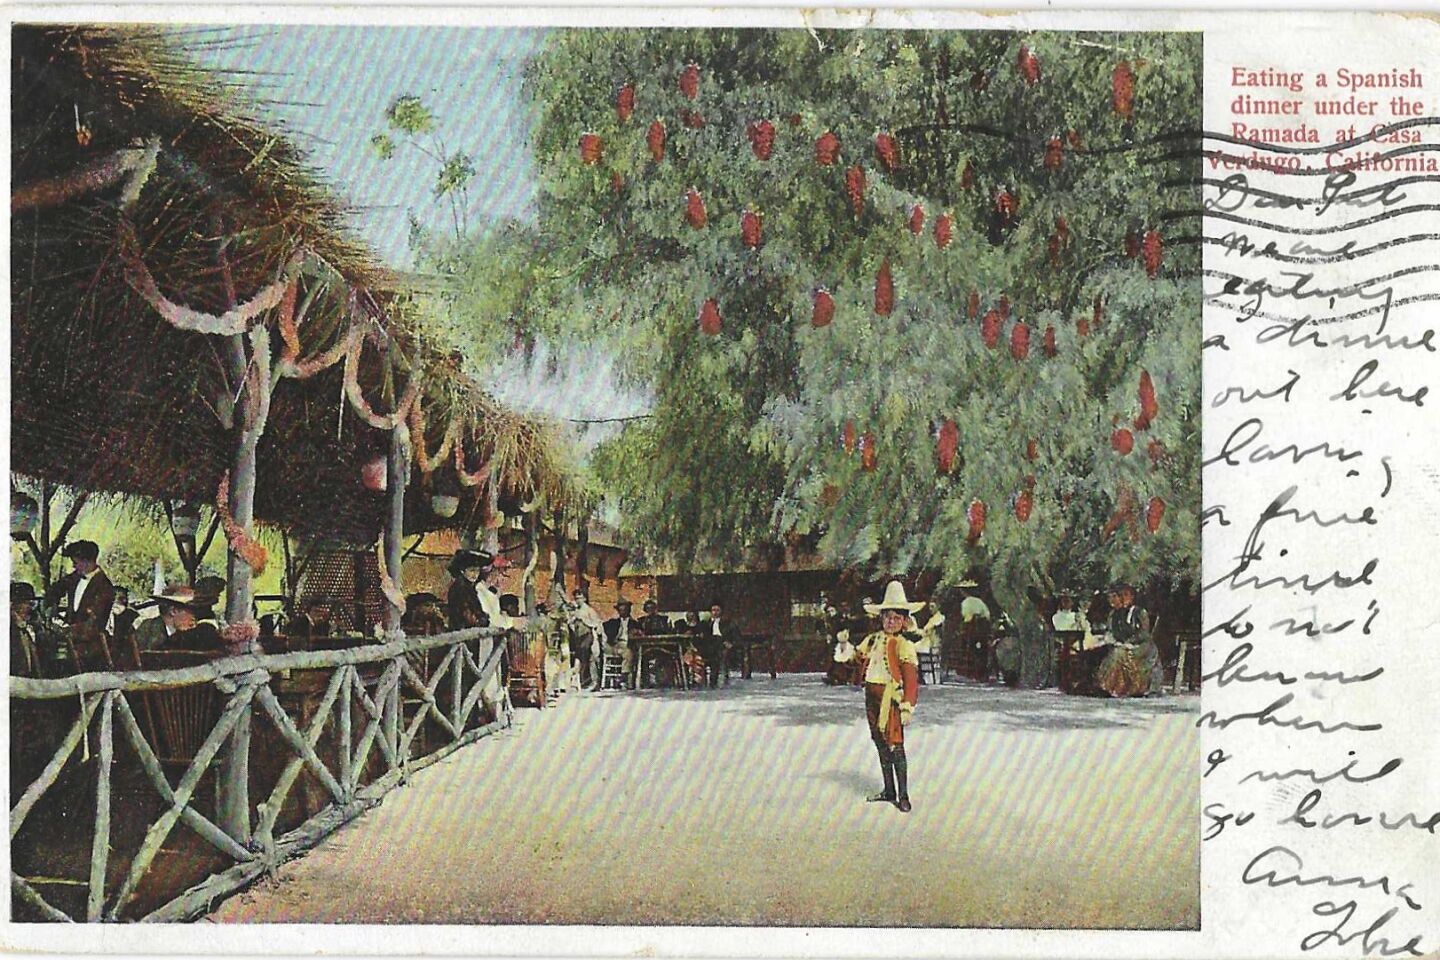 The front of a postcard depicting Casa Verdugo